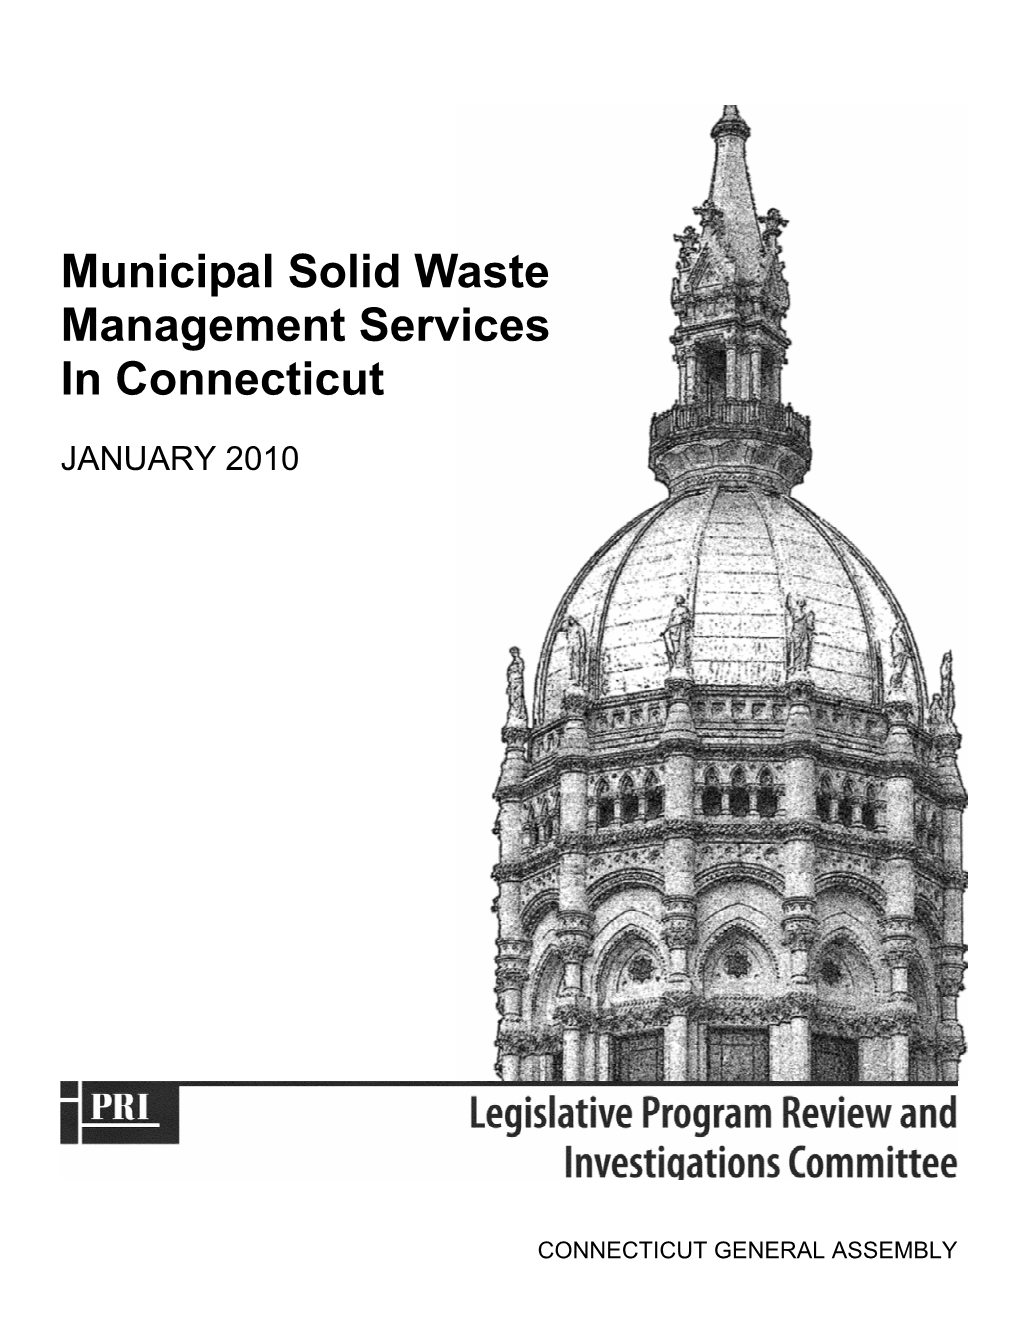 Municipal Solid Waste Management Services in Connecticut